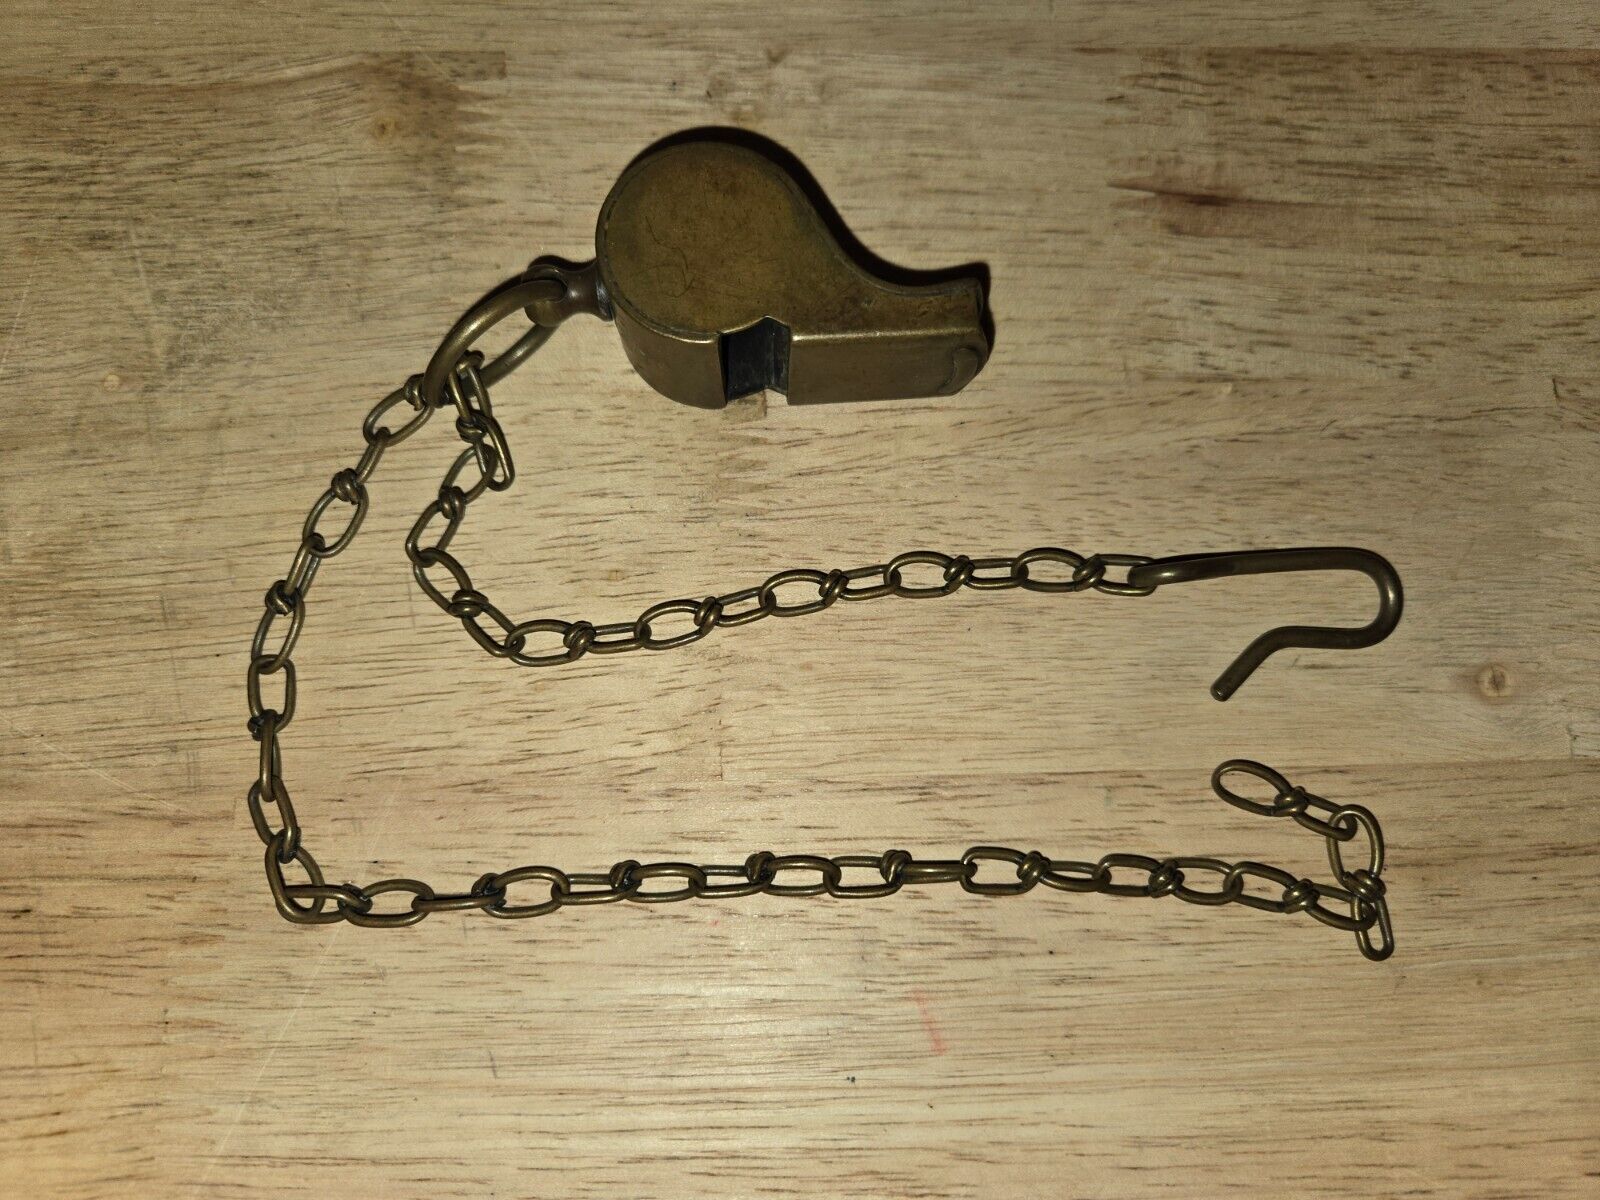 VERY OLD VTG BRASS UNMARKED WHISTLE & CHAIN POLICE? MILITARY? NO MARK. SOLID